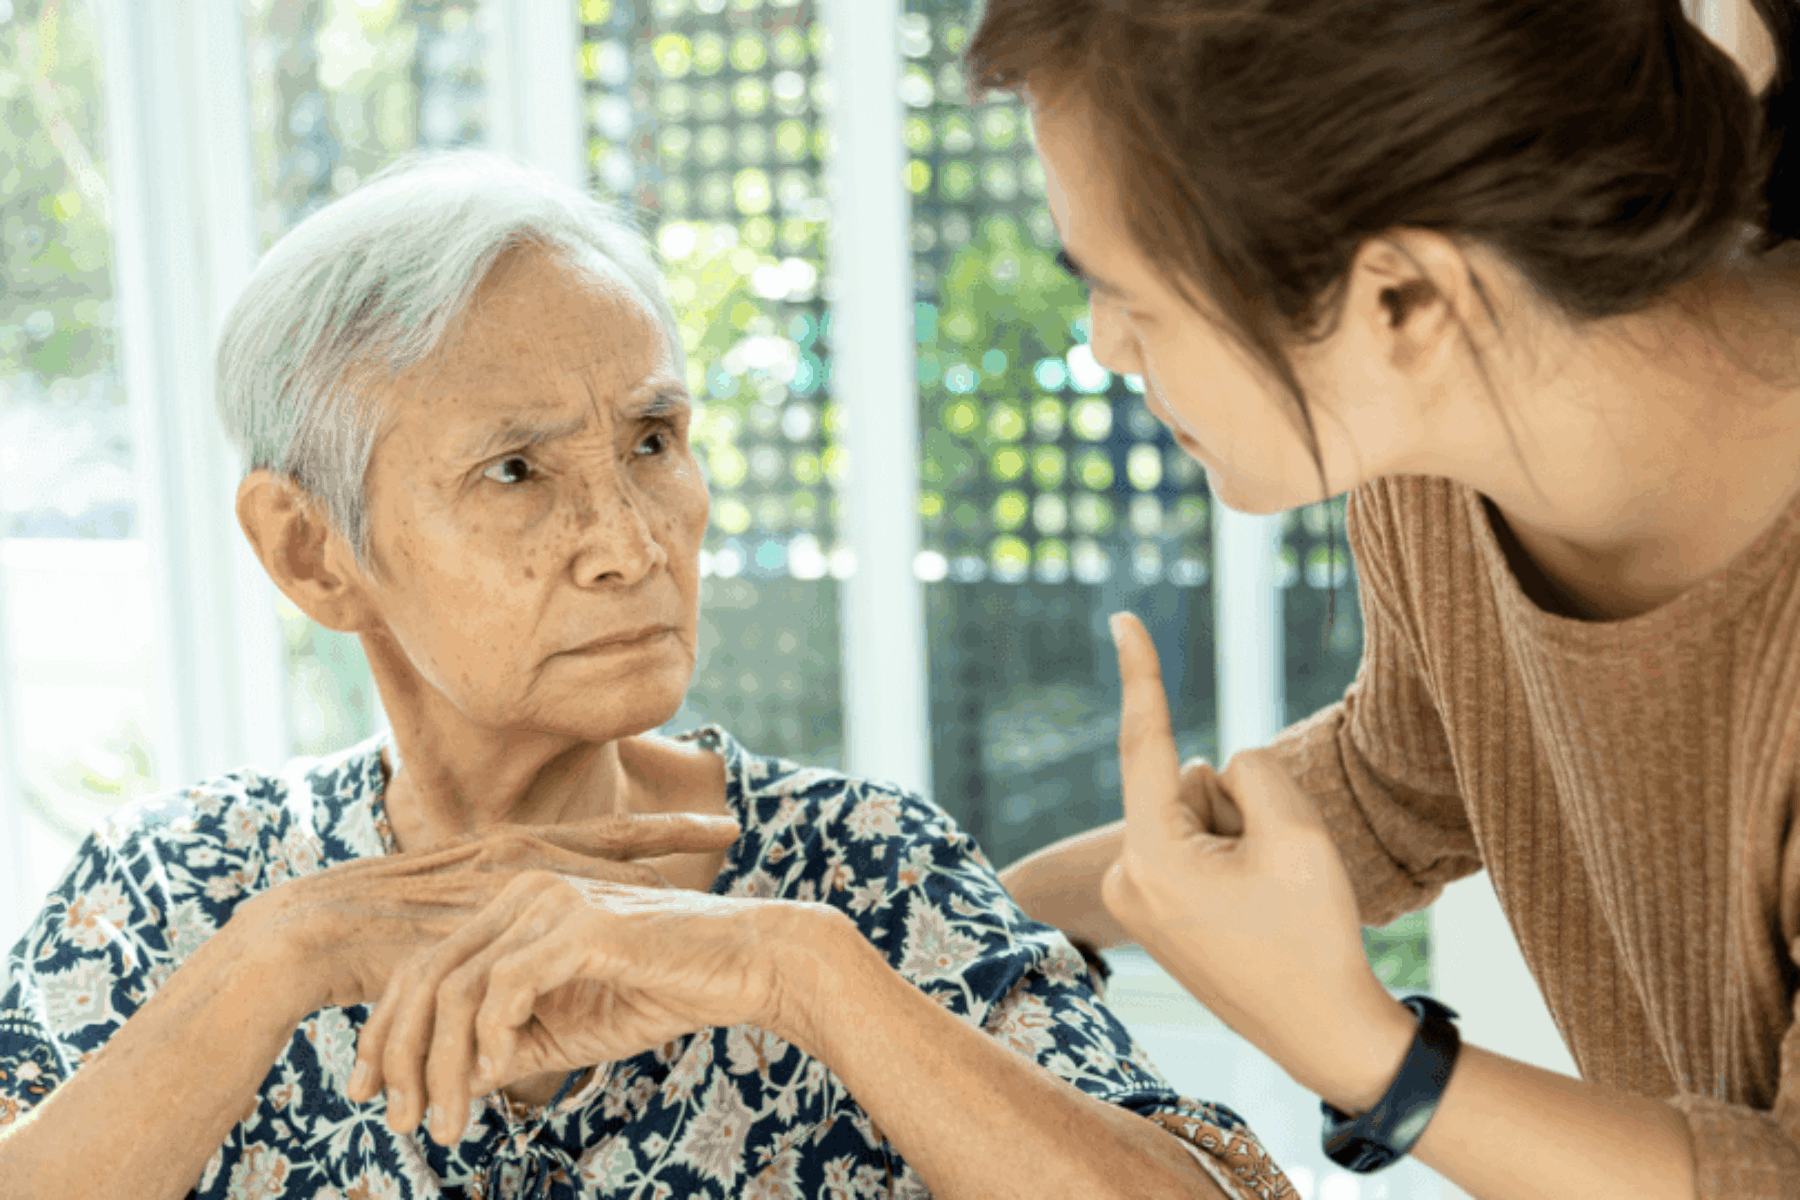 Older adult woman looking at a relative with a confused, almost angry look on her face.